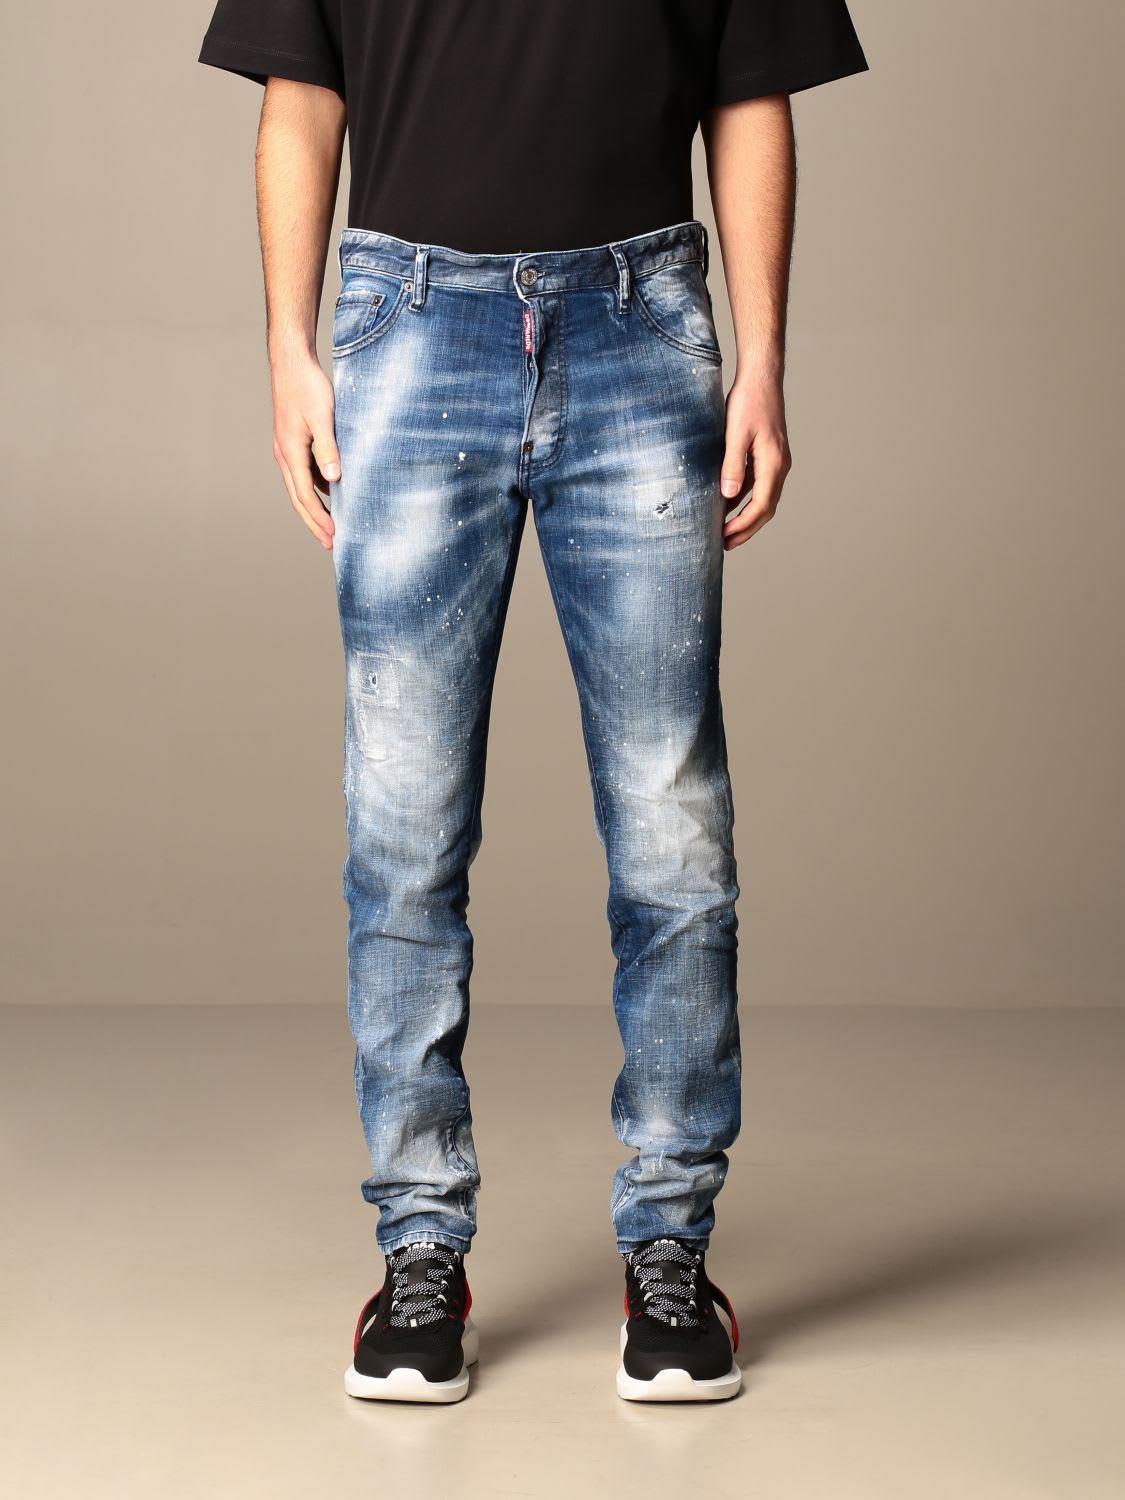 Dsquared2 Jeans Cool Guy Dsquared2 5-pocket Jeans In Used Denim With Rips